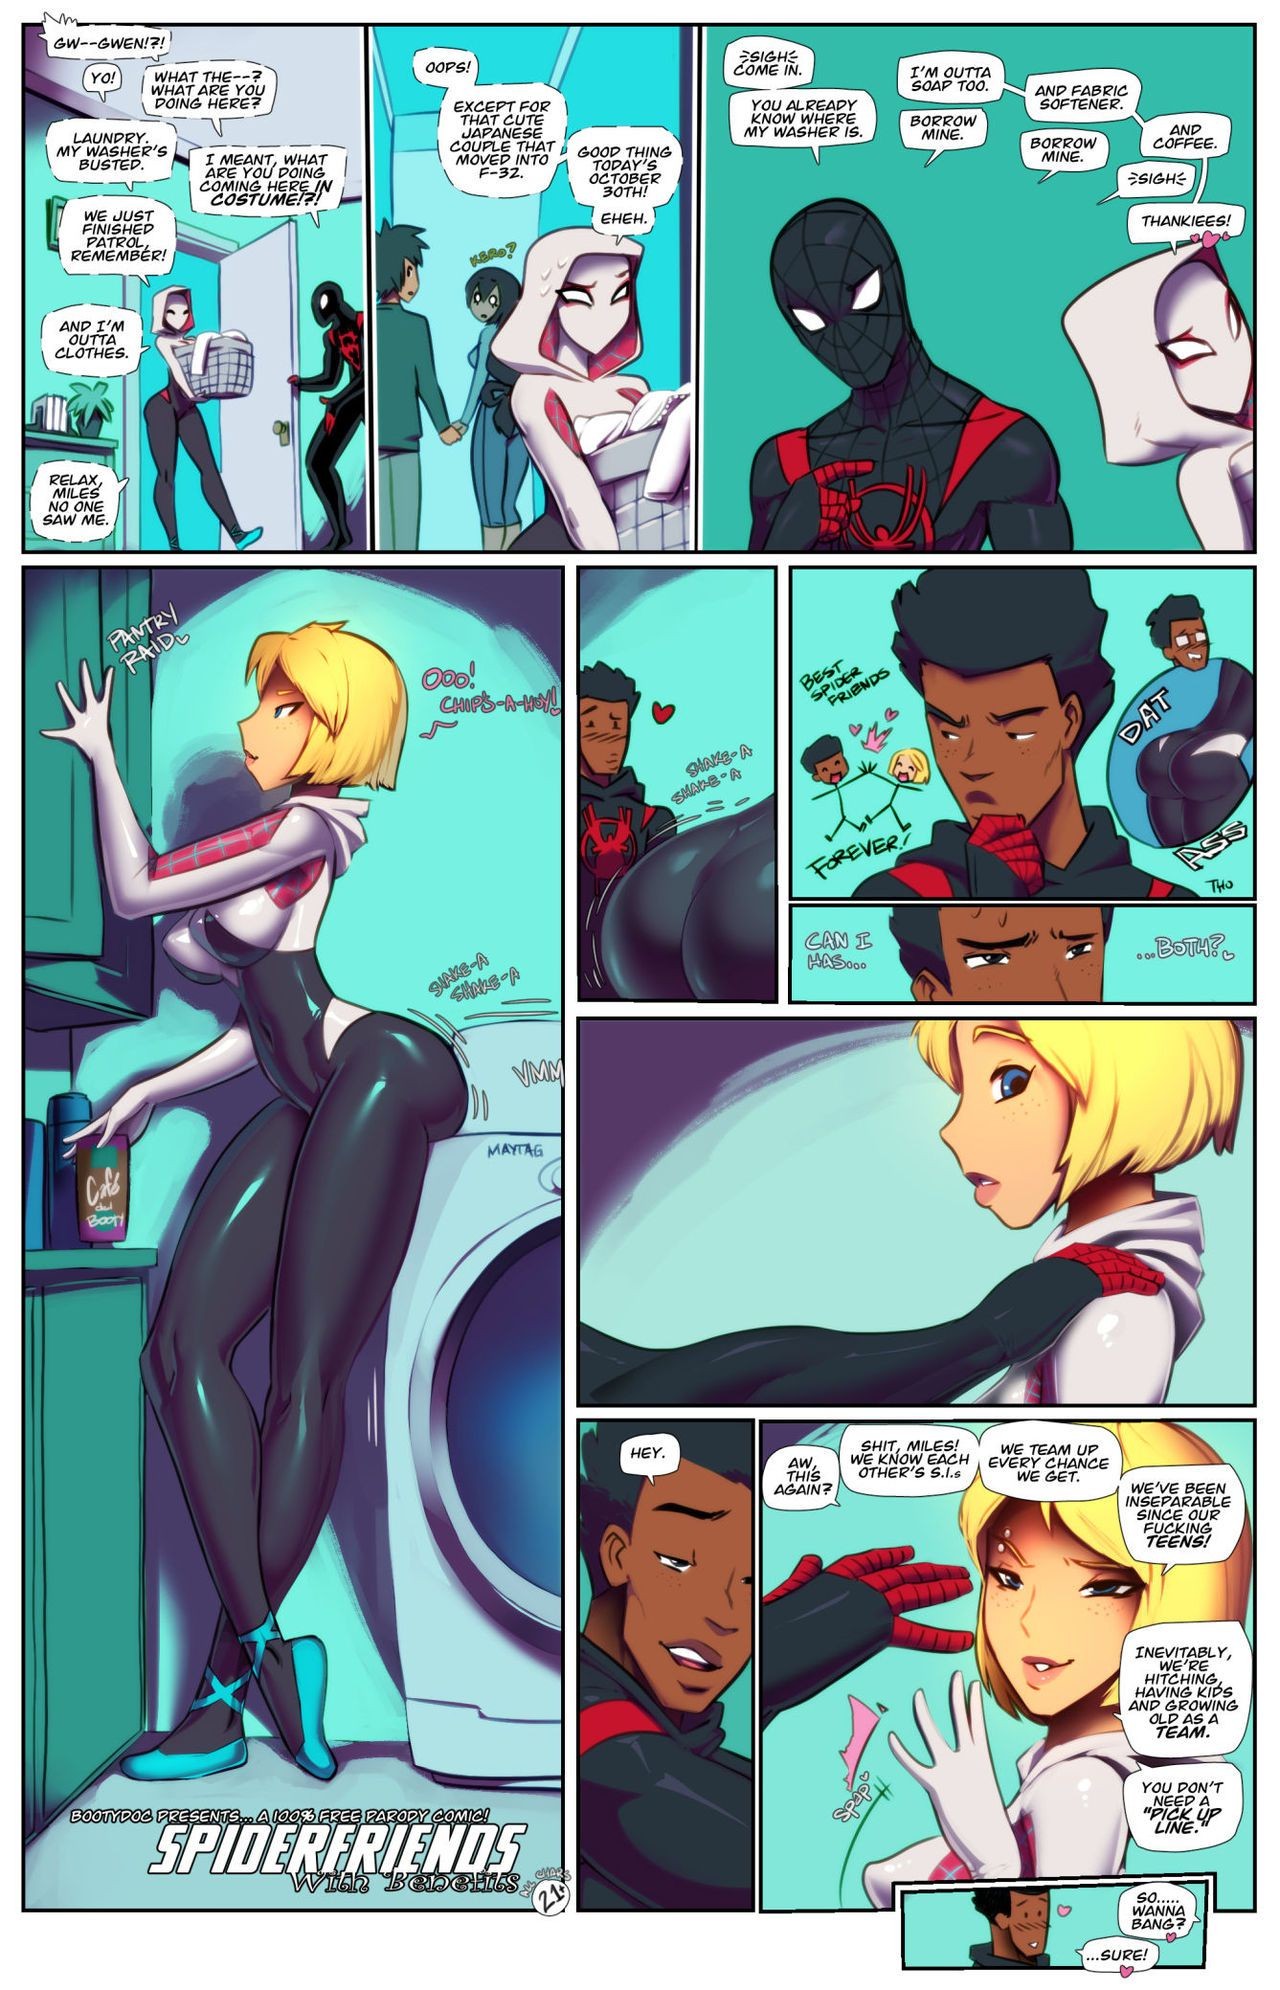 Private Sex [Fred Perry] SpiderFriends With Benefits (Spider-Man: Into The Spider-verse) [Ongoing] Black Woman